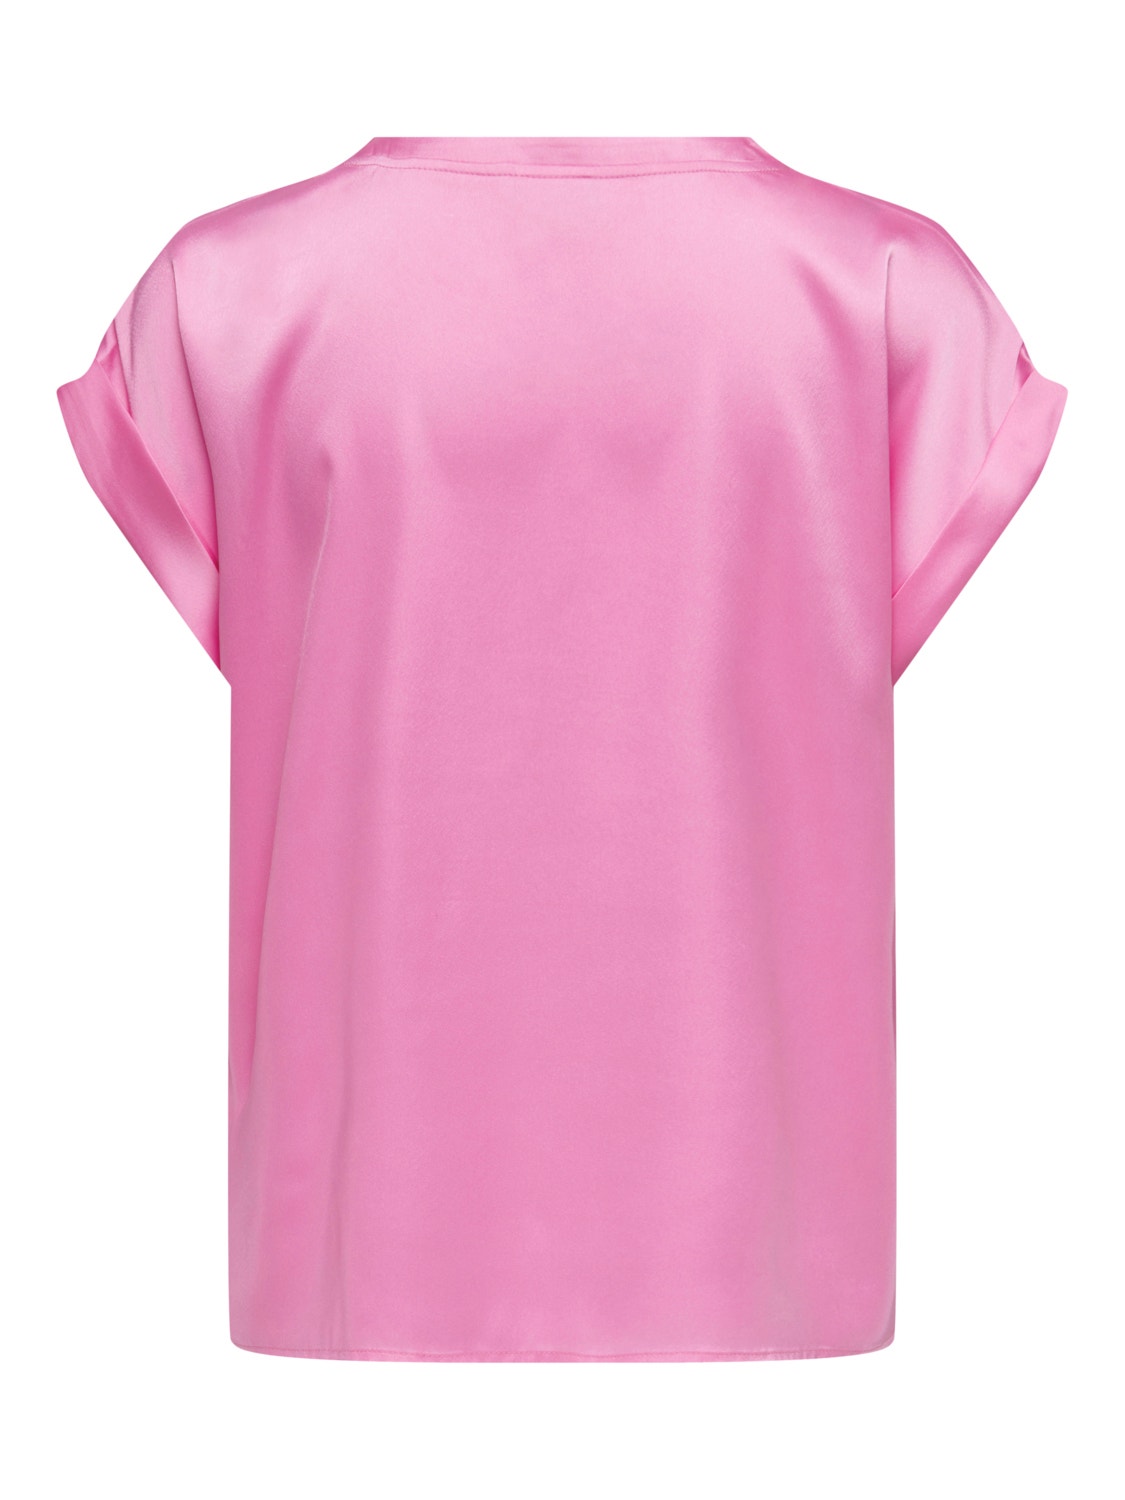 ONLY Regular fit O-hals Top -Fuchsia Pink - 15304077